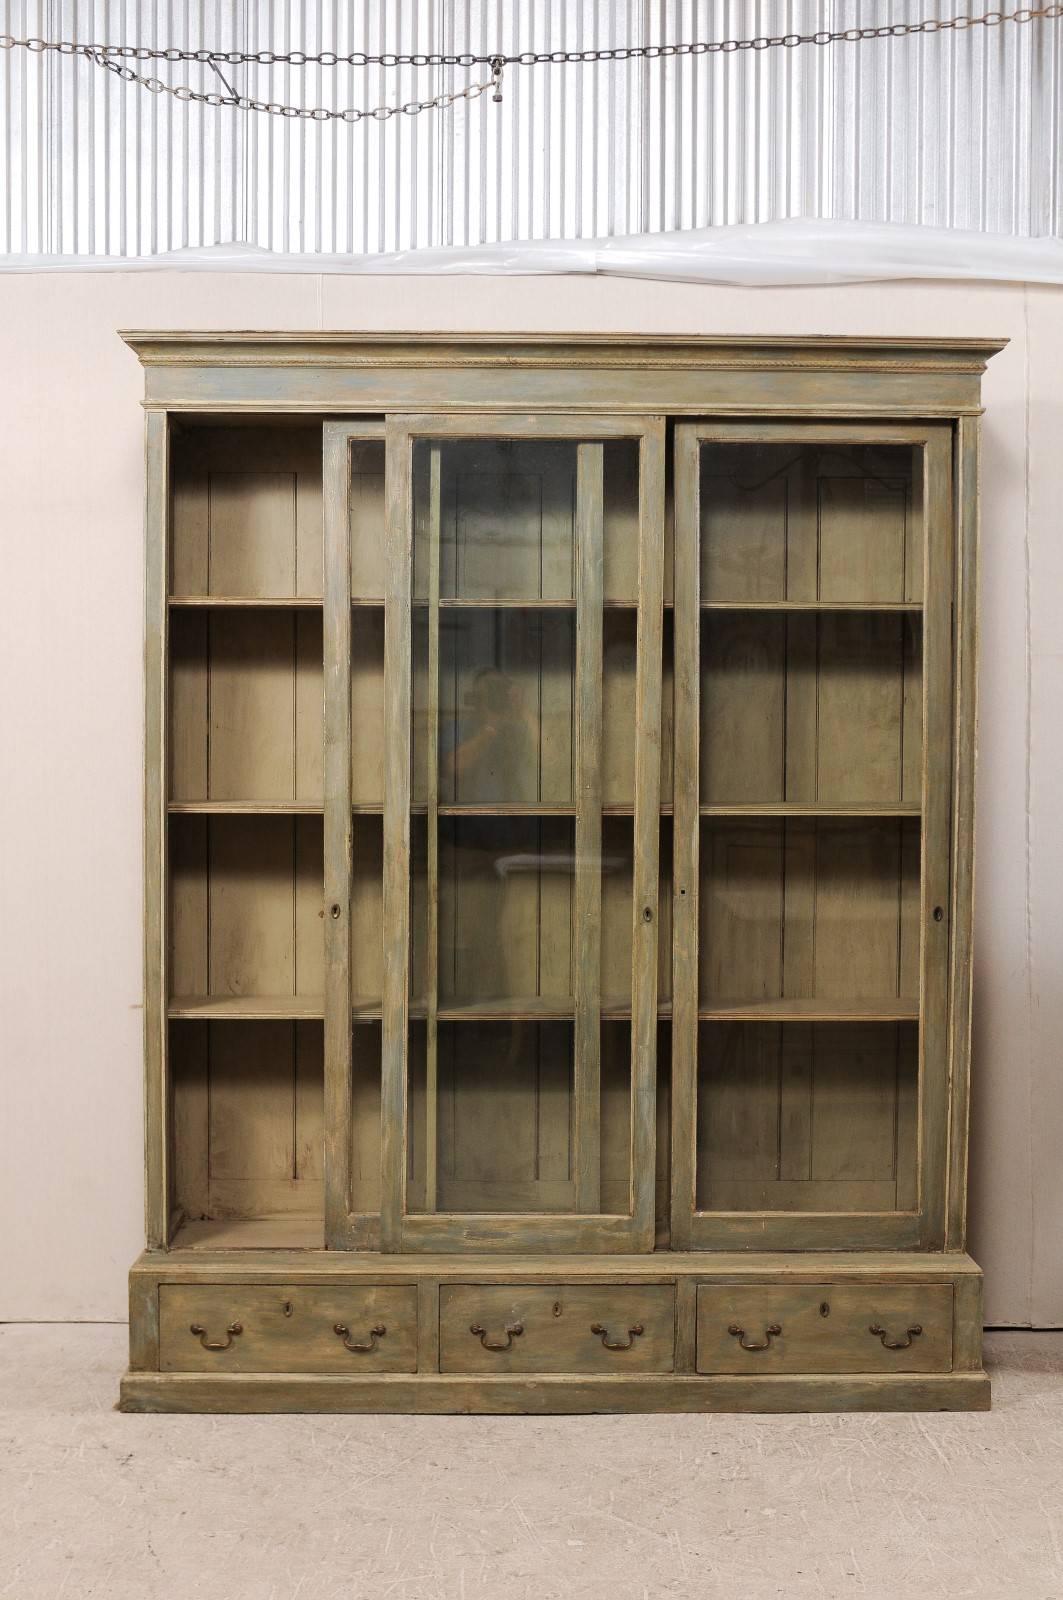 A French late 19th century large painted wood bookcase with sliding doors. This French cabinet, circa 1880, features three sliding glass doors with adjustable wood shelving behind, over three outset bottom drawers. It has a molded cornice with rope